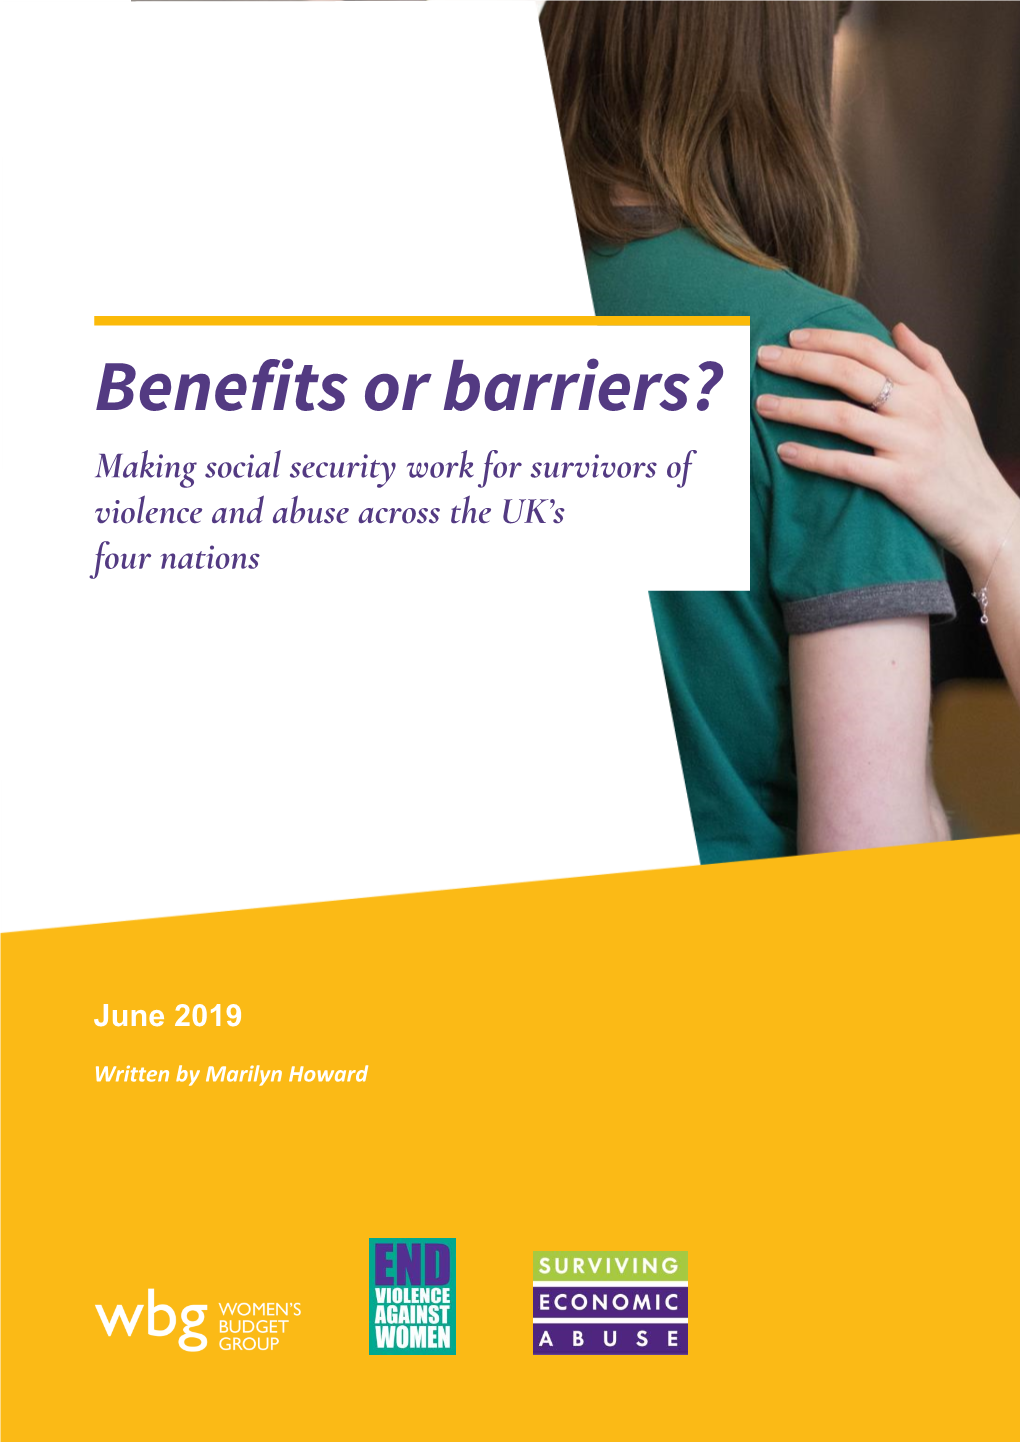 Benefits Or Barriers? Making Social Security Work for Survivors of Violence and Abuse Across the UK’S Four Nations